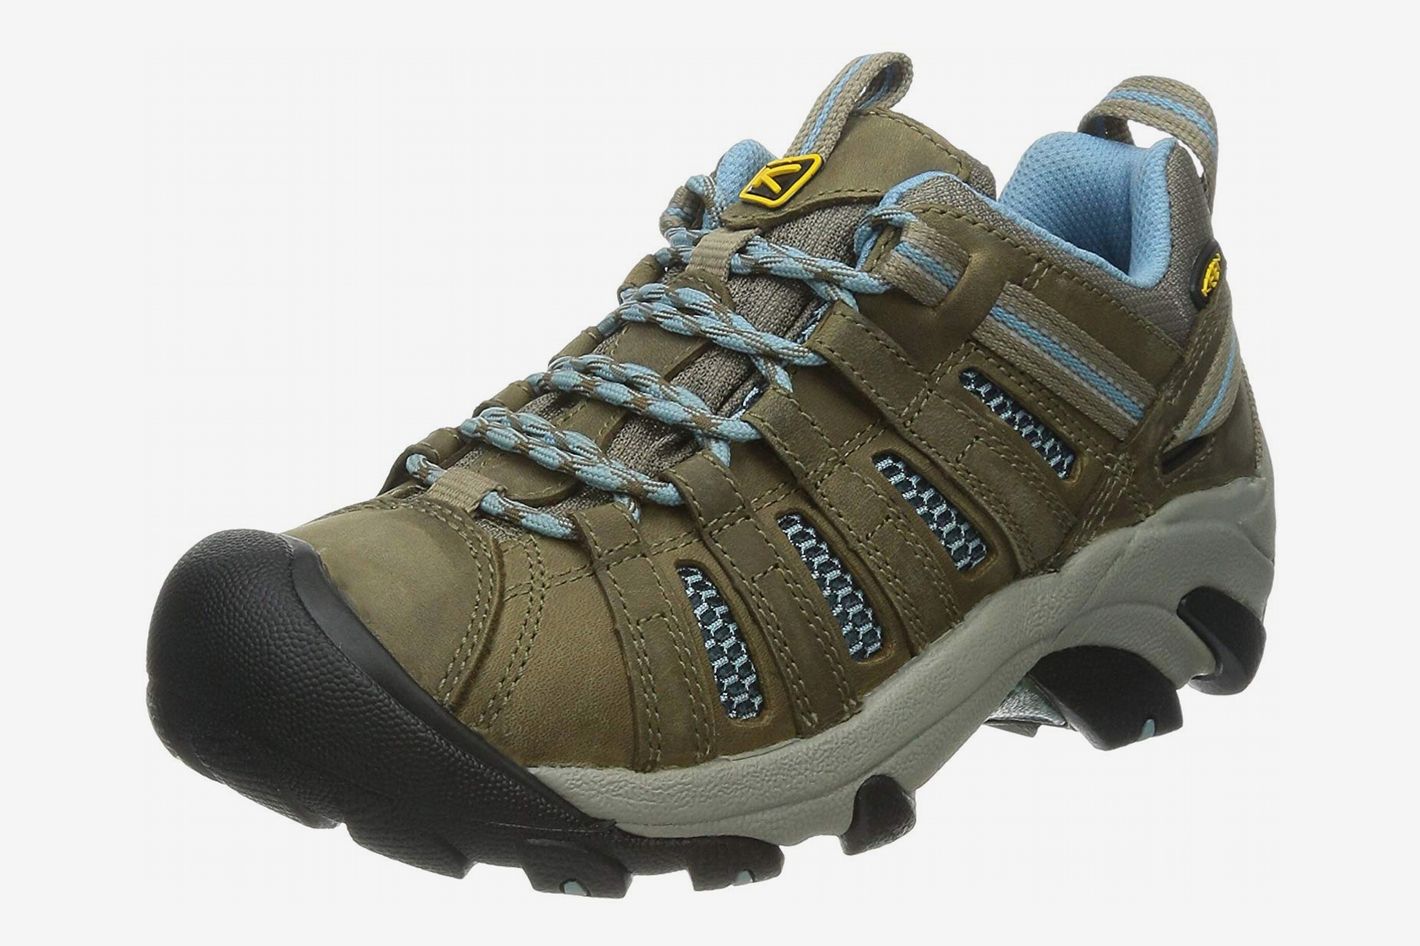 9 Best Women’s Hiking Boots and Sneakers 2019